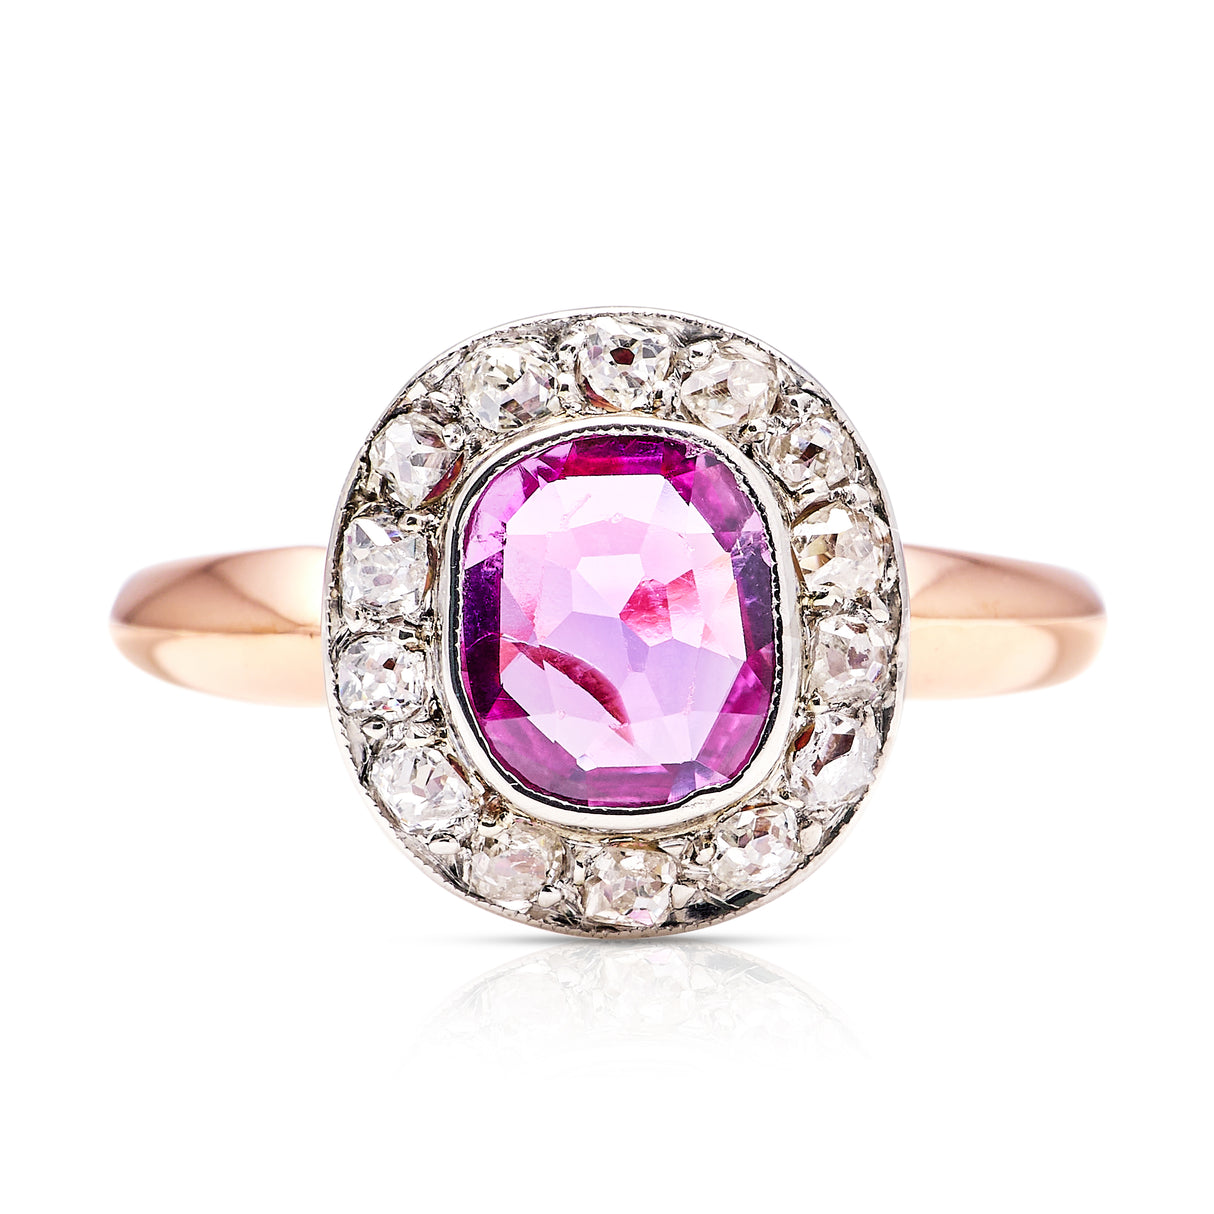 Antique, Edwardian pink sapphire and diamond cluster ring, 18ct yellow gold